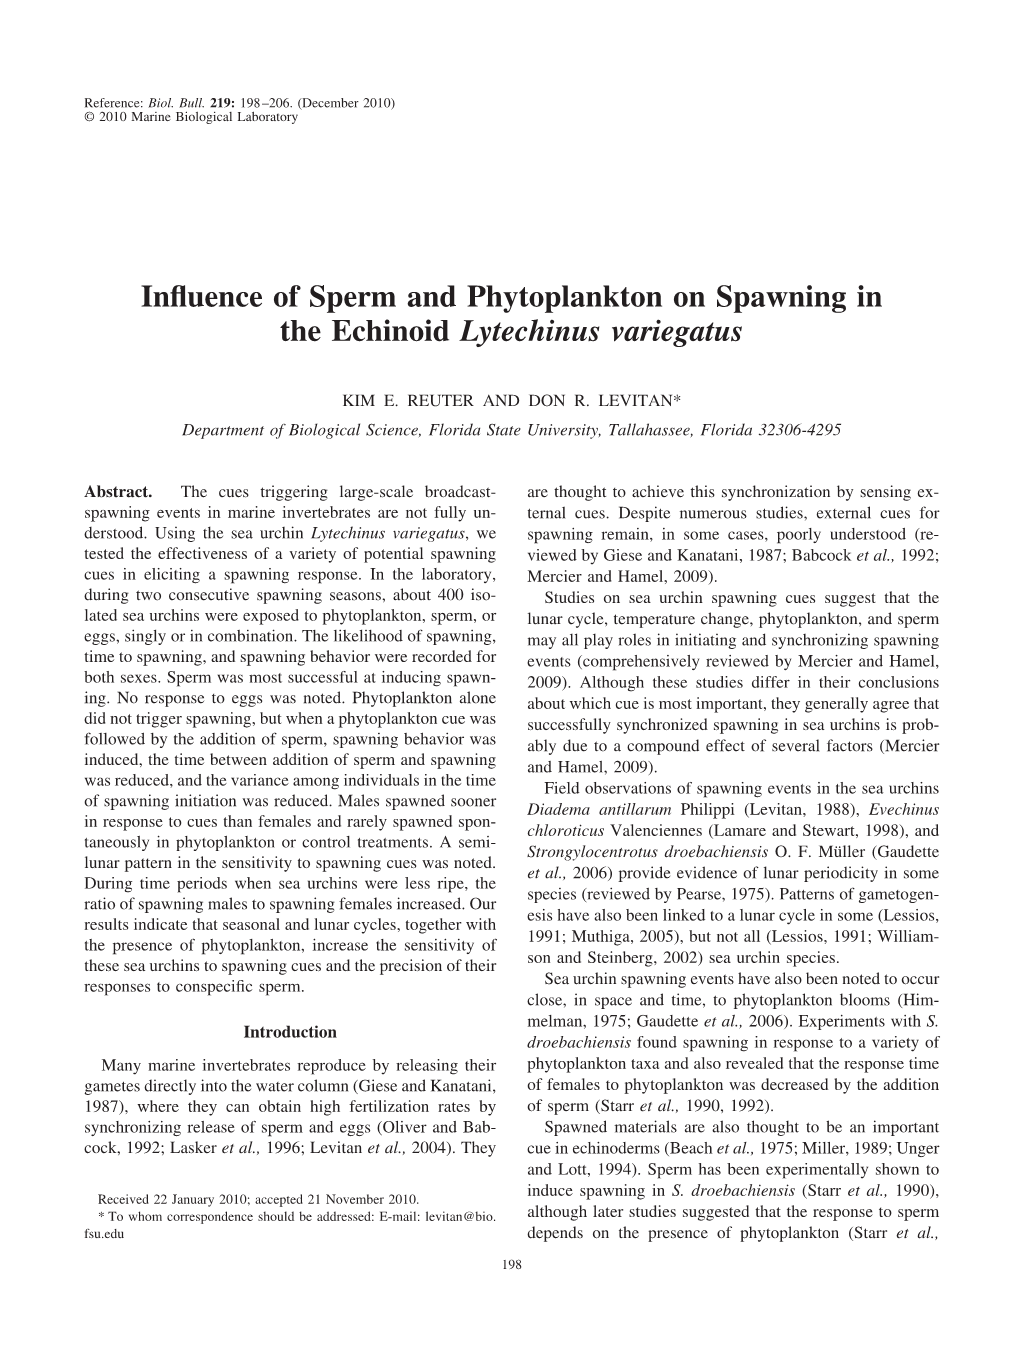 Influence of Sperm and Phytoplankton on Spawning in the Echinoid